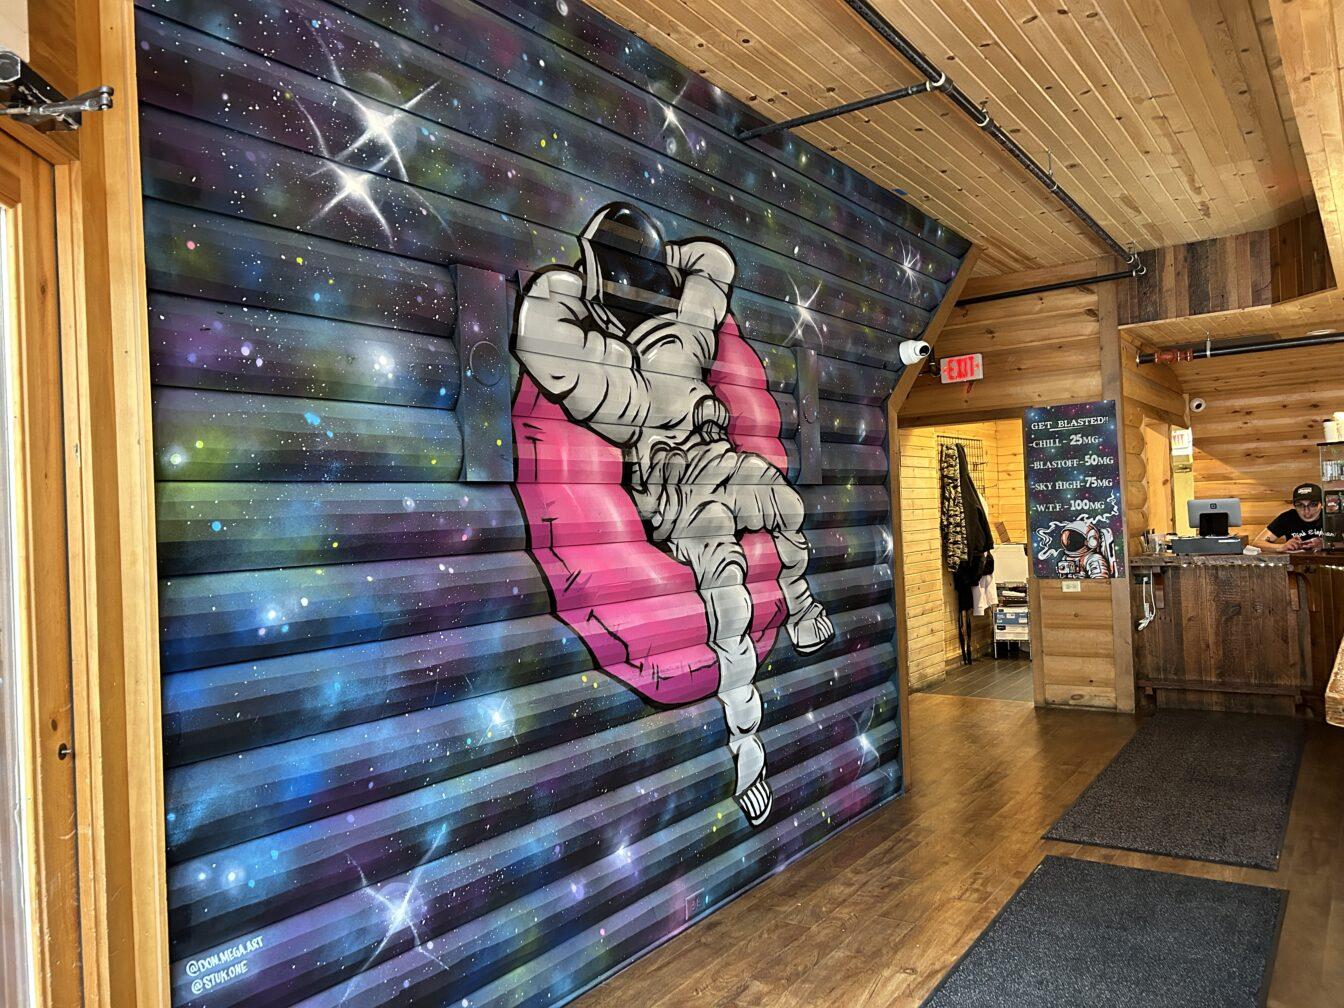 Chicago-based+%E2%80%98cannabis+cafe%E2%80%99+opens+on+State+Street